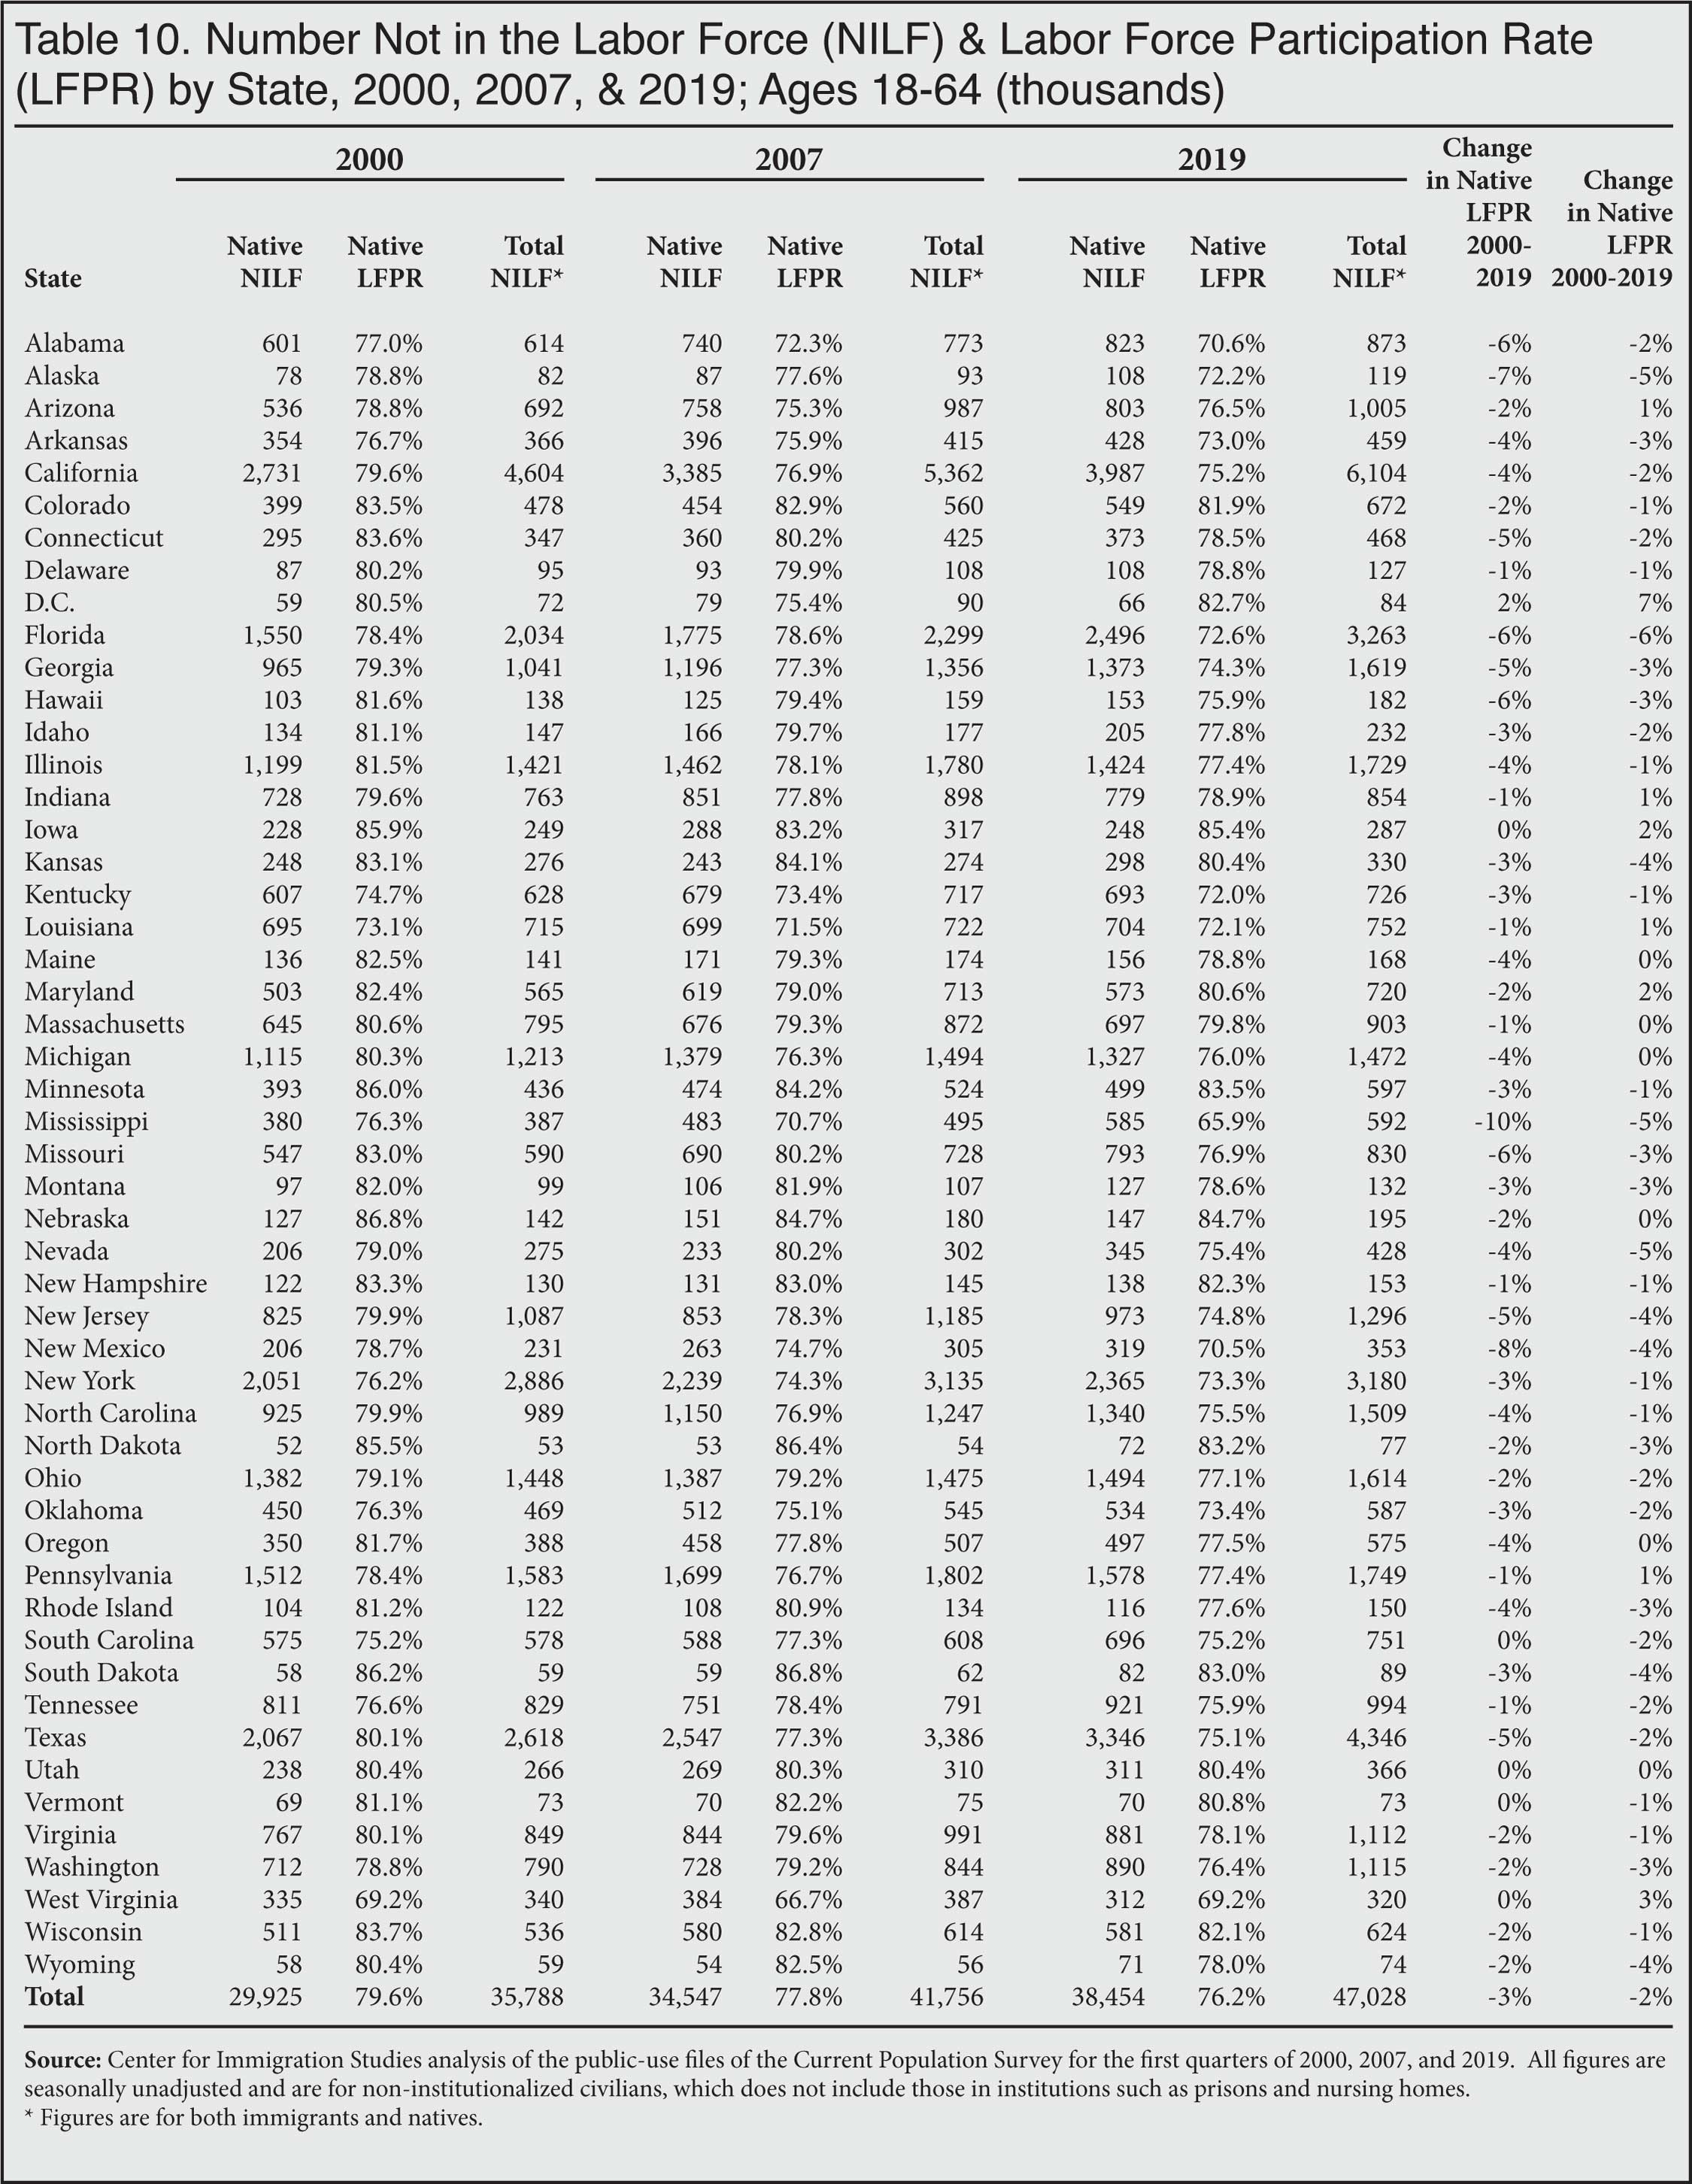 Table: Number not in the Labor Force and Labor Force Participation Rate by State, 2000, 2007, 2019